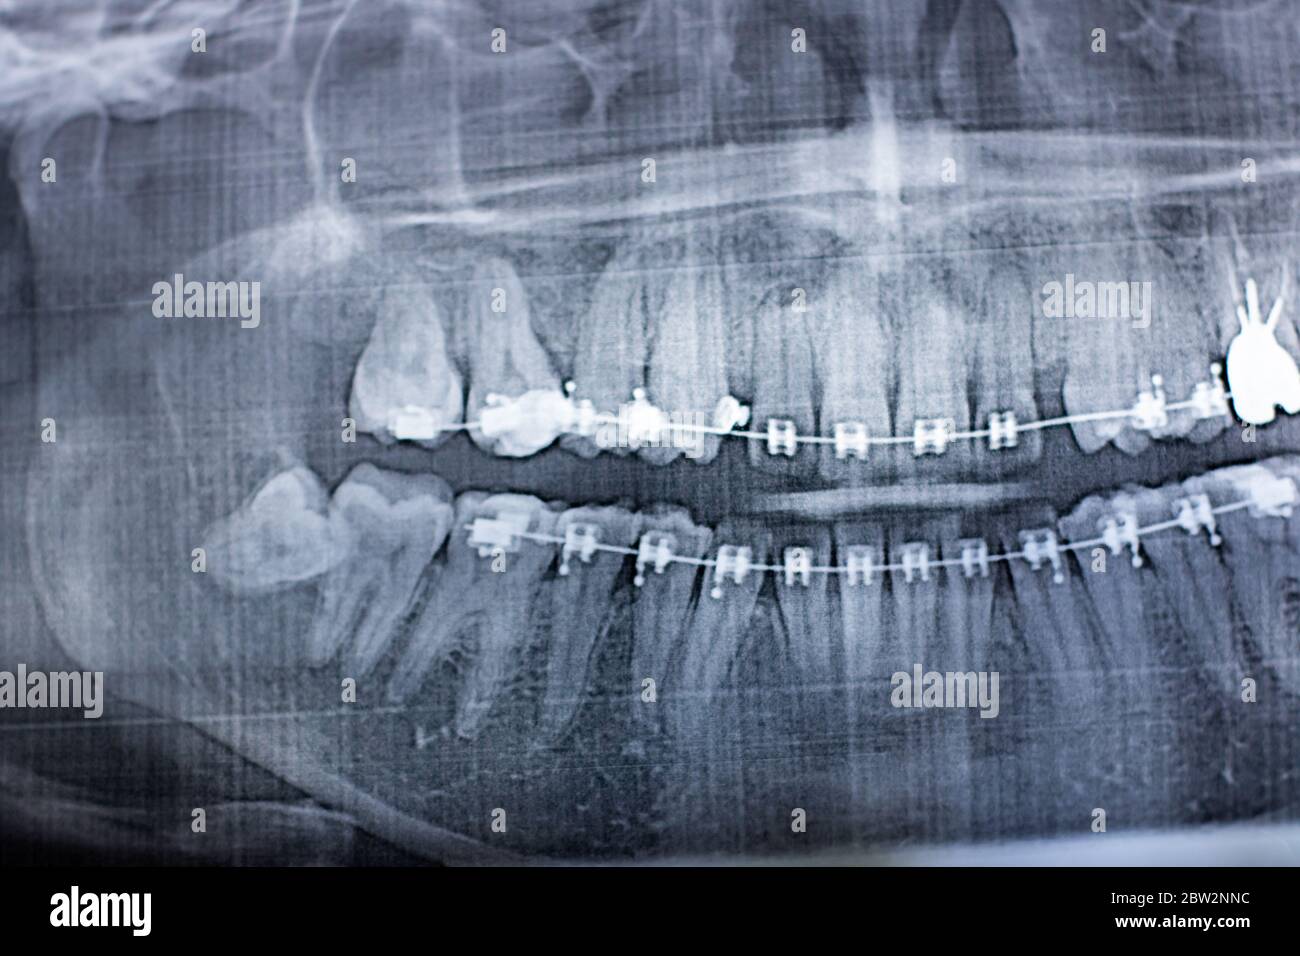 X-ray photograph of human teeth with a braces system. Retarded Wisdom Tooth Stock Photo